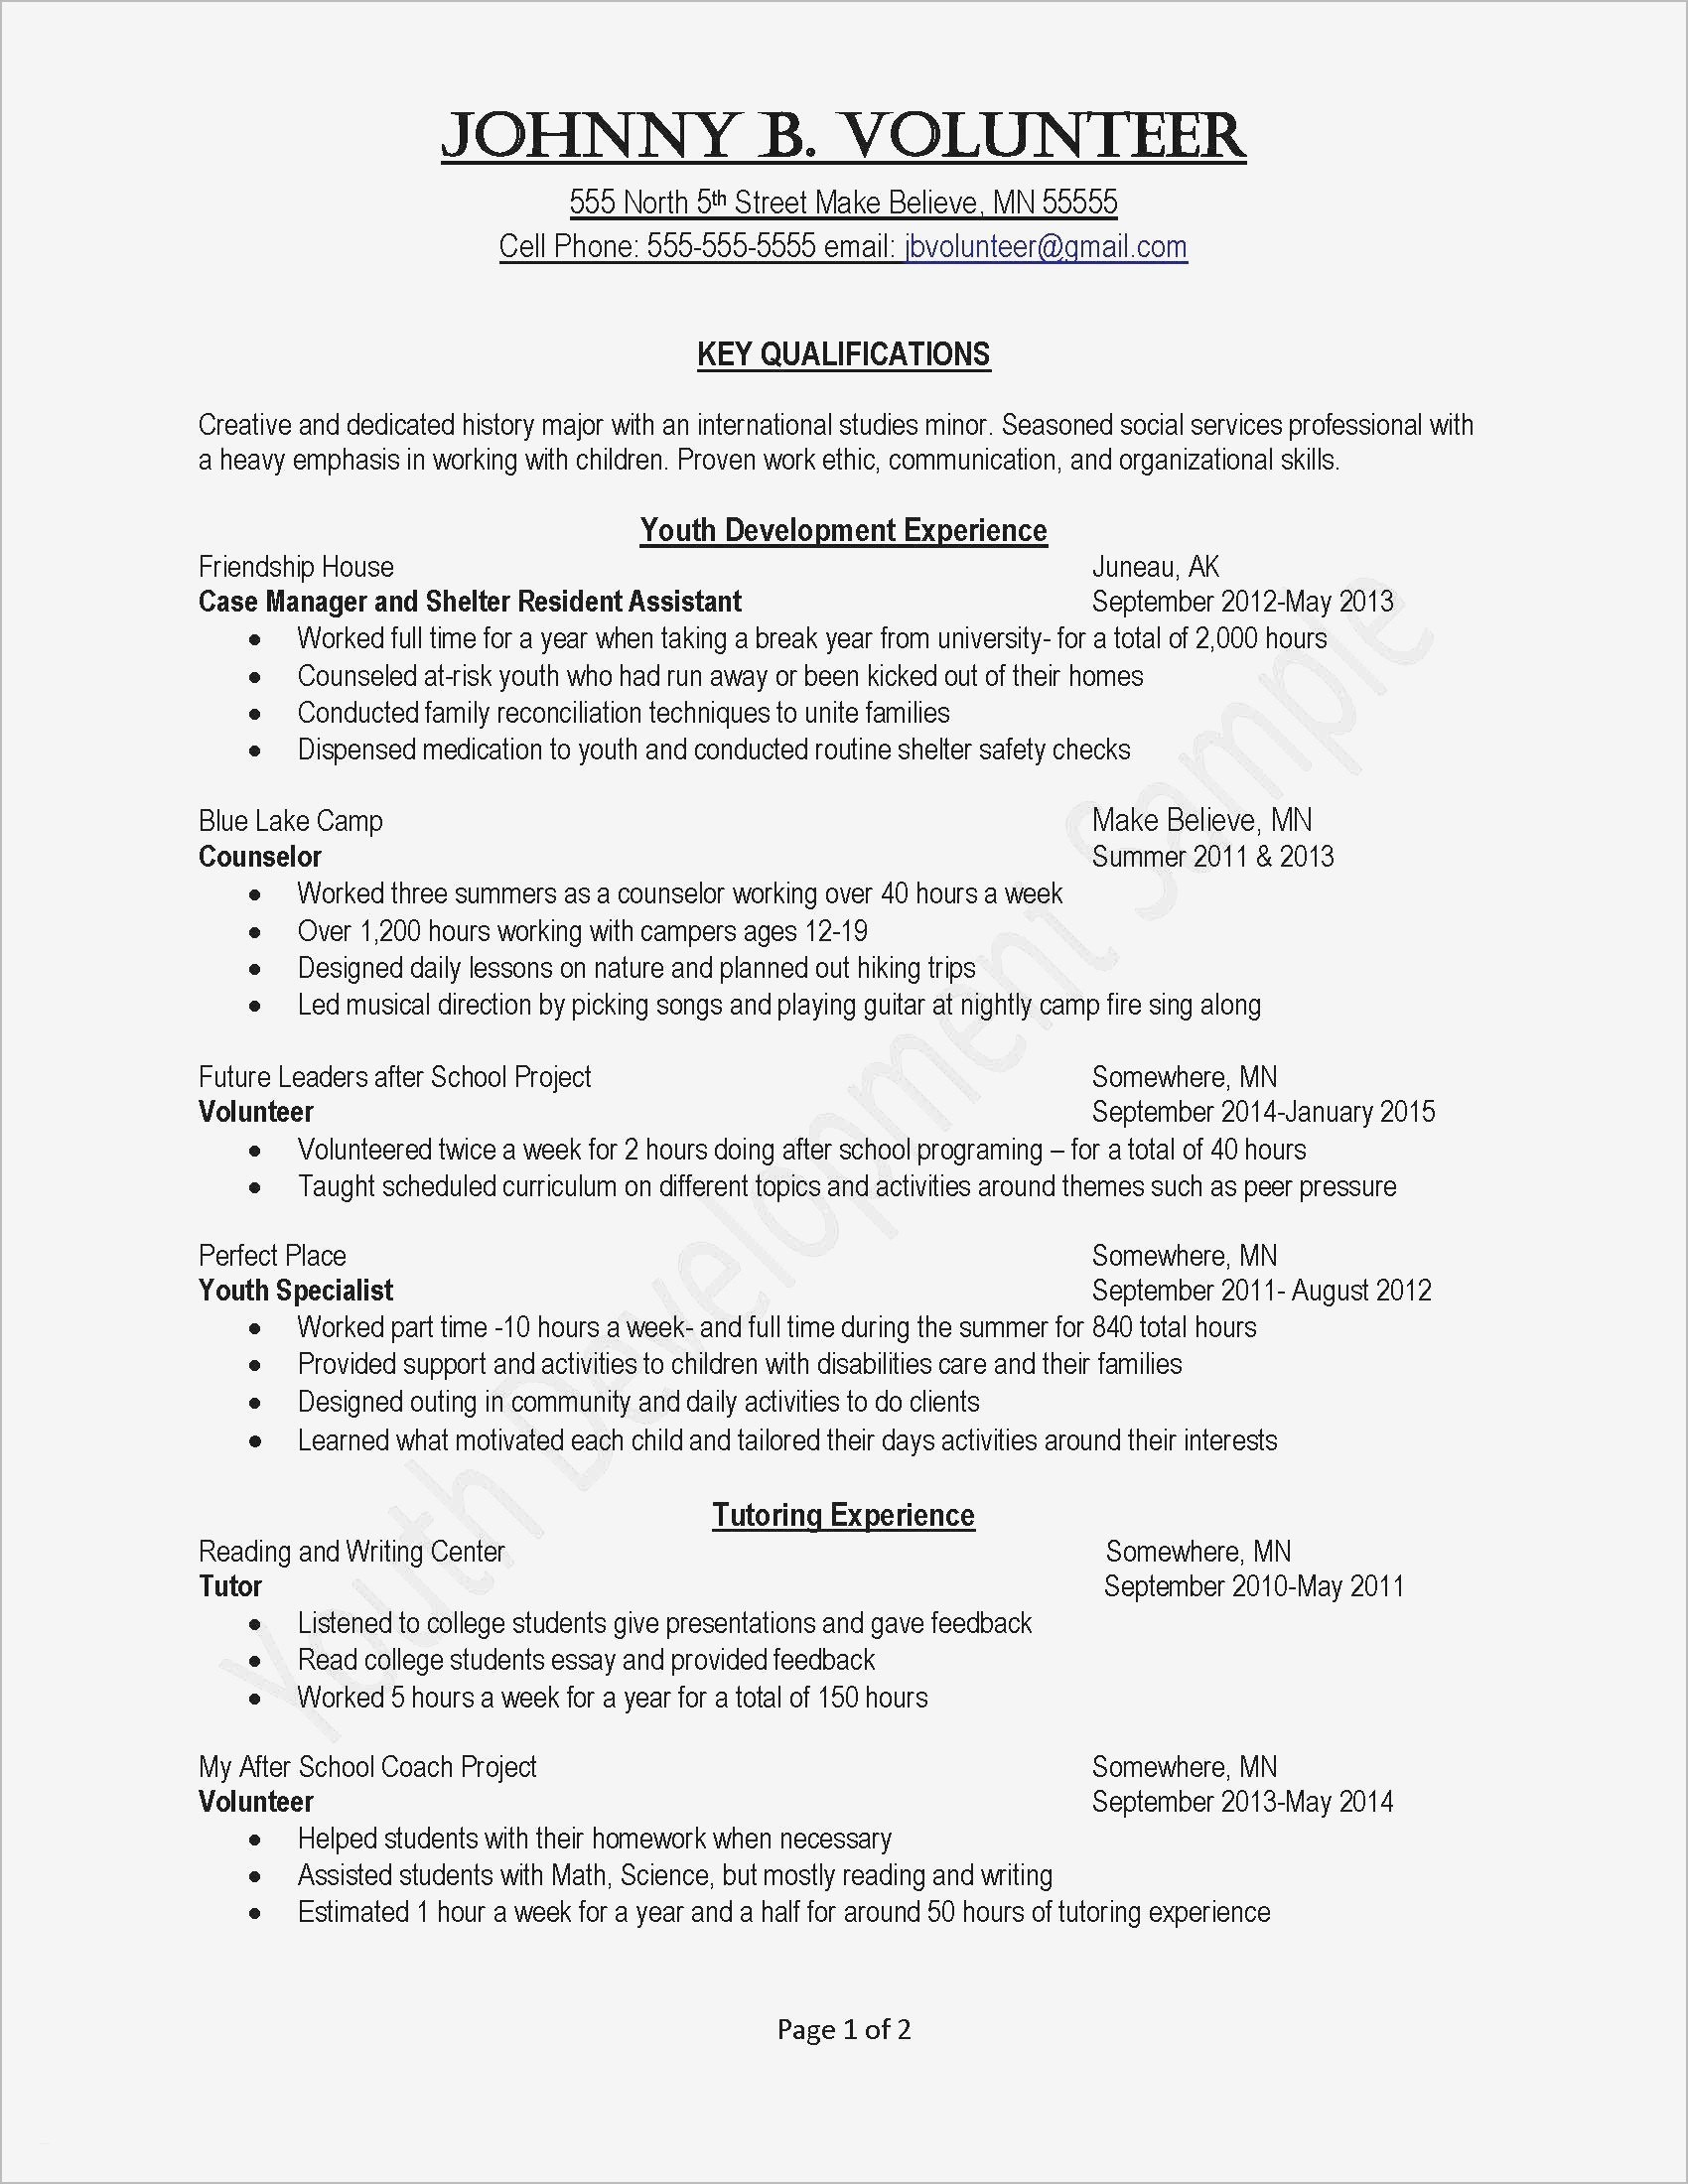 Recommendation Letter Template for Job - Job Re Mendation Letter Template Valid 1 Page Resume Templates